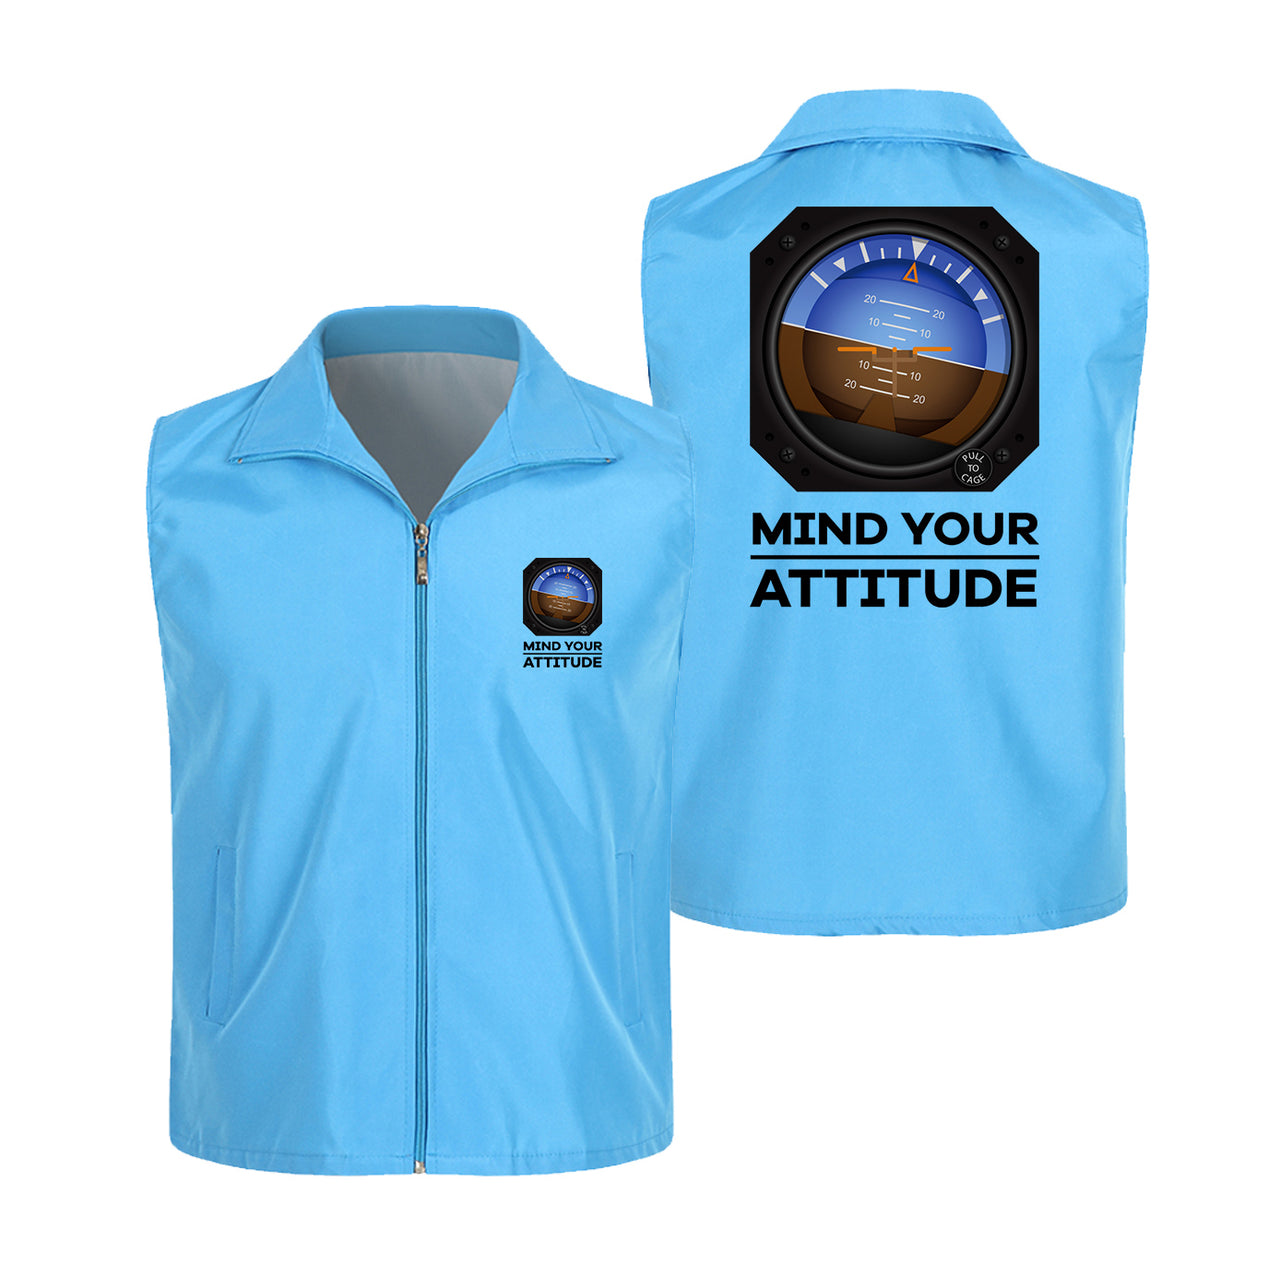 Mind Your Attitude Designed Thin Style Vests